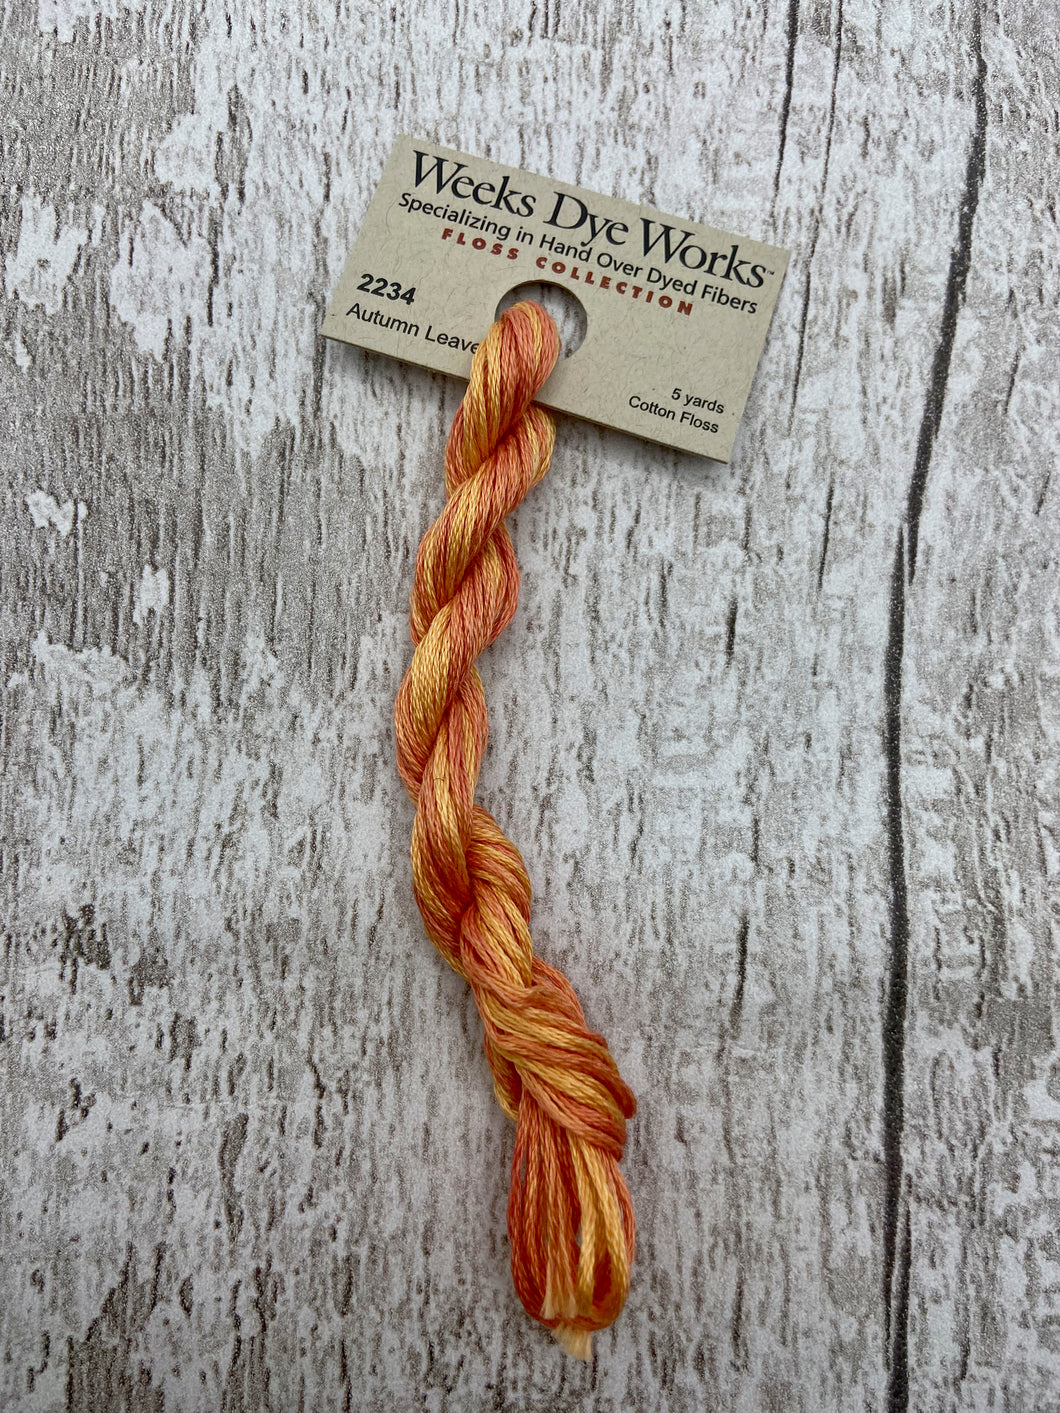 Autumn Leaves (#2234) Weeks Dye Works 6-strand cotton floss